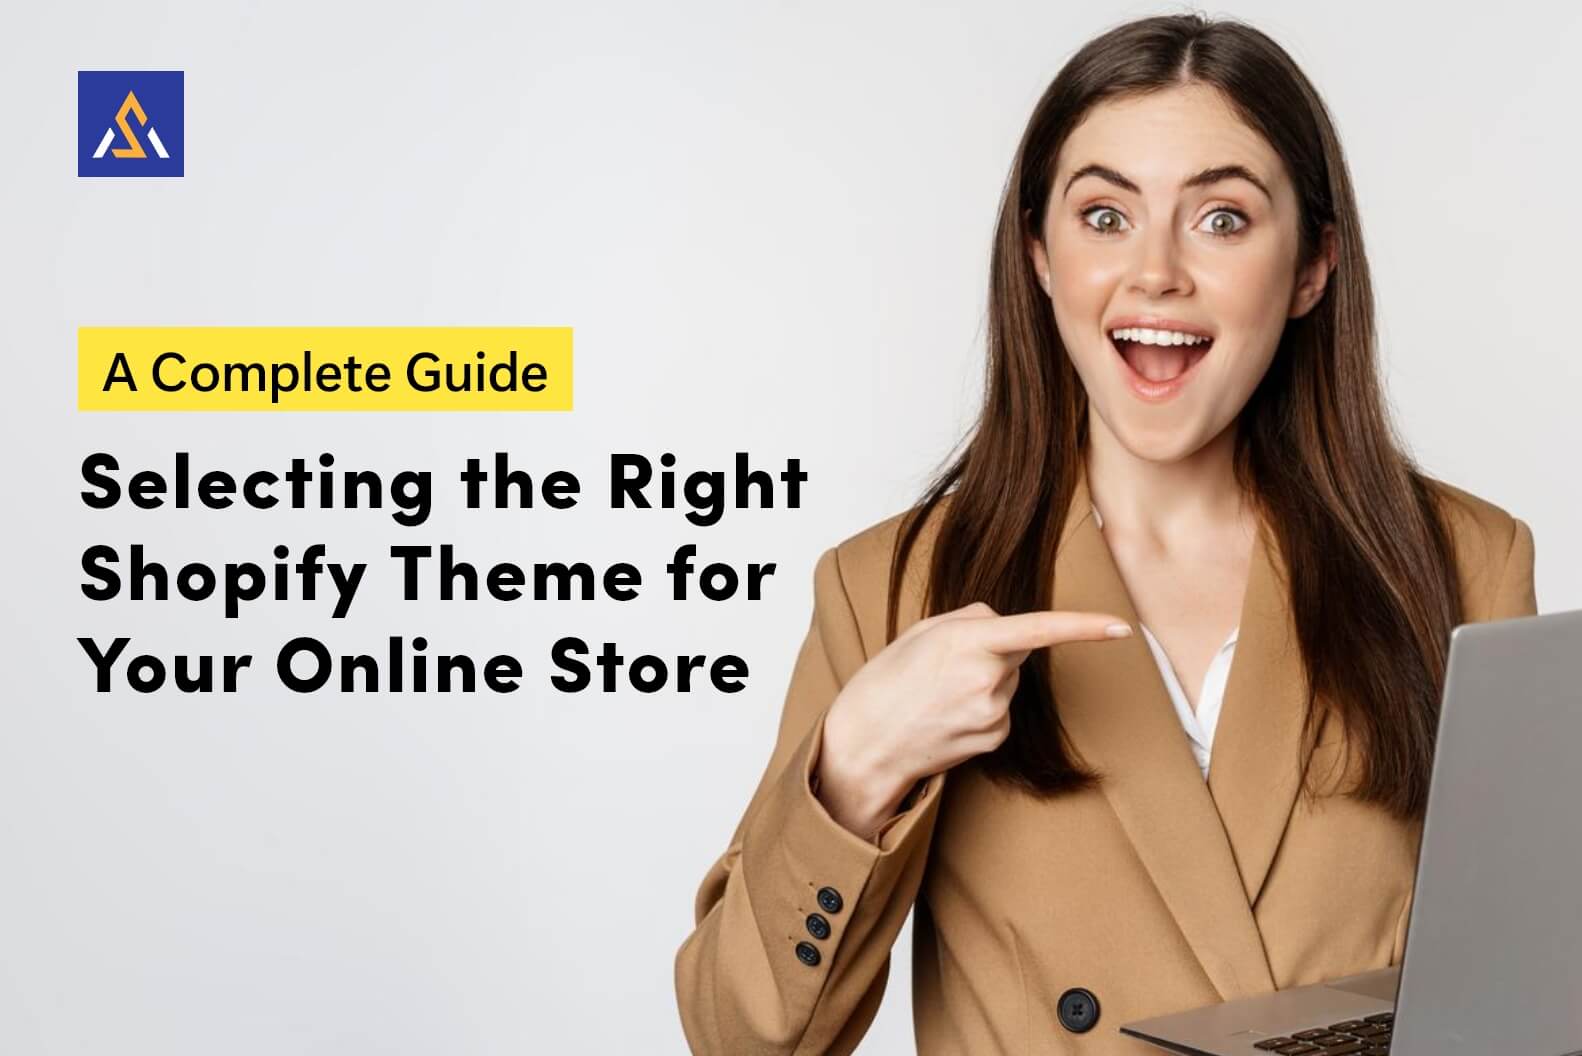 Selecting the Right Shopify Theme